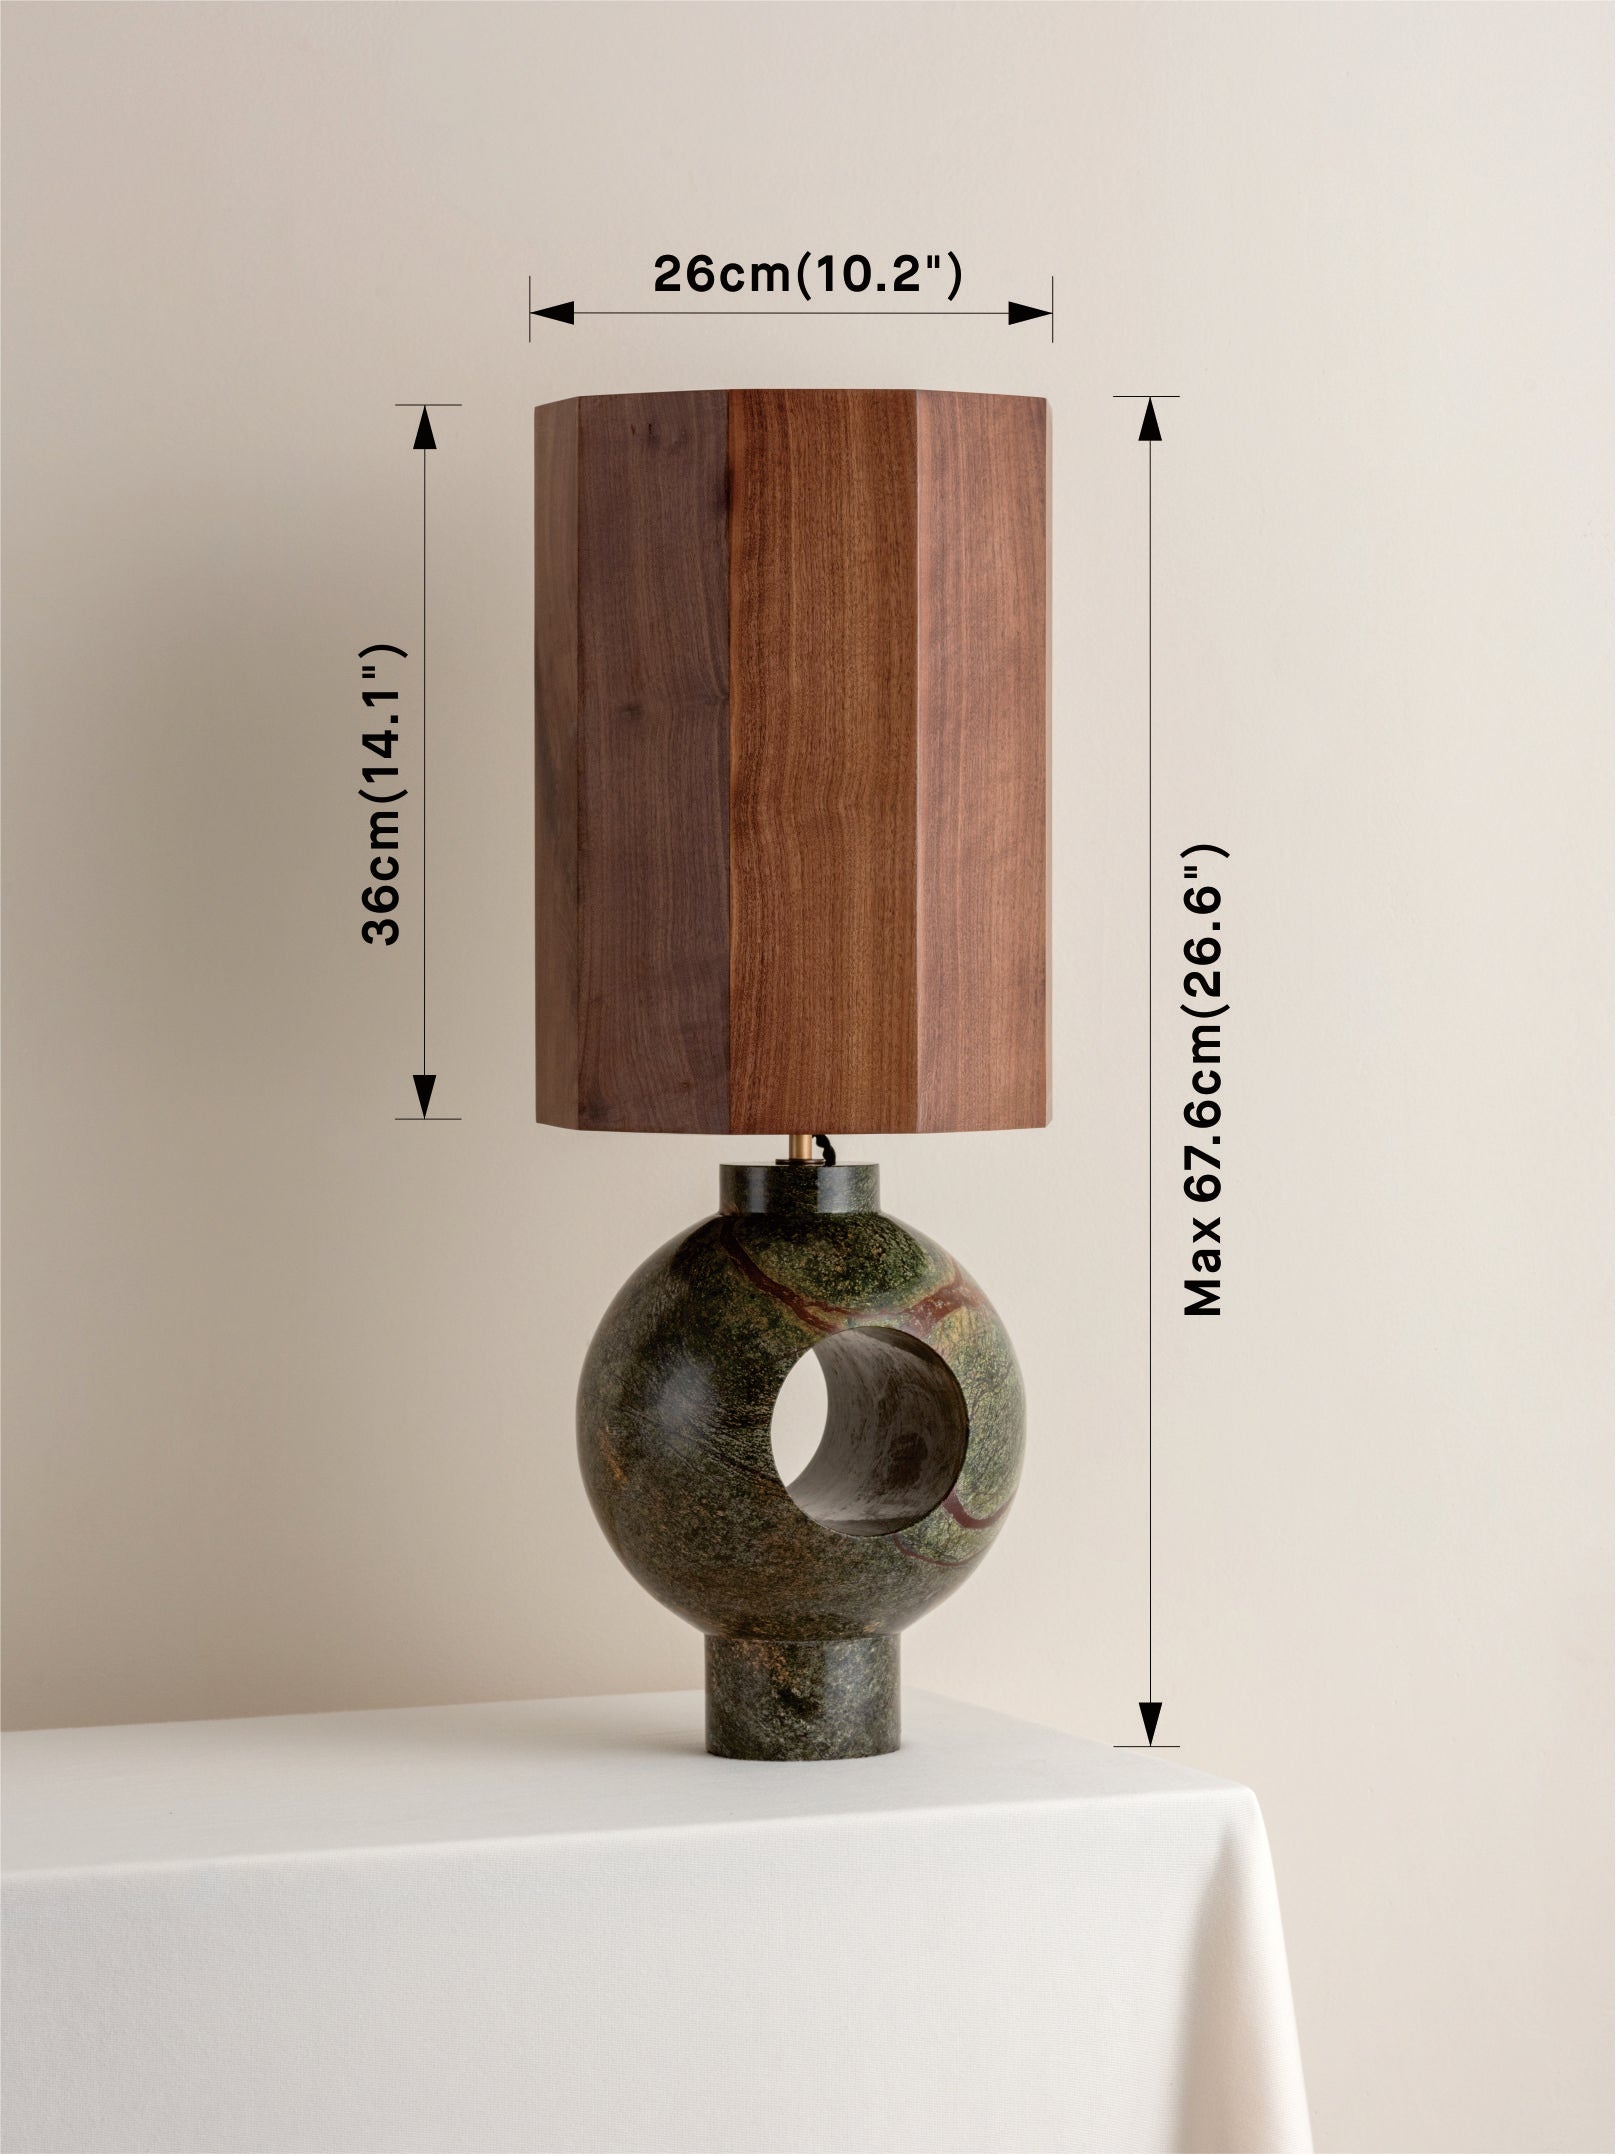 Editions marble lamp with + walnut wood shade | Table Lamp | Lights & Lamps | UK | Modern Affordable Designer Lighting